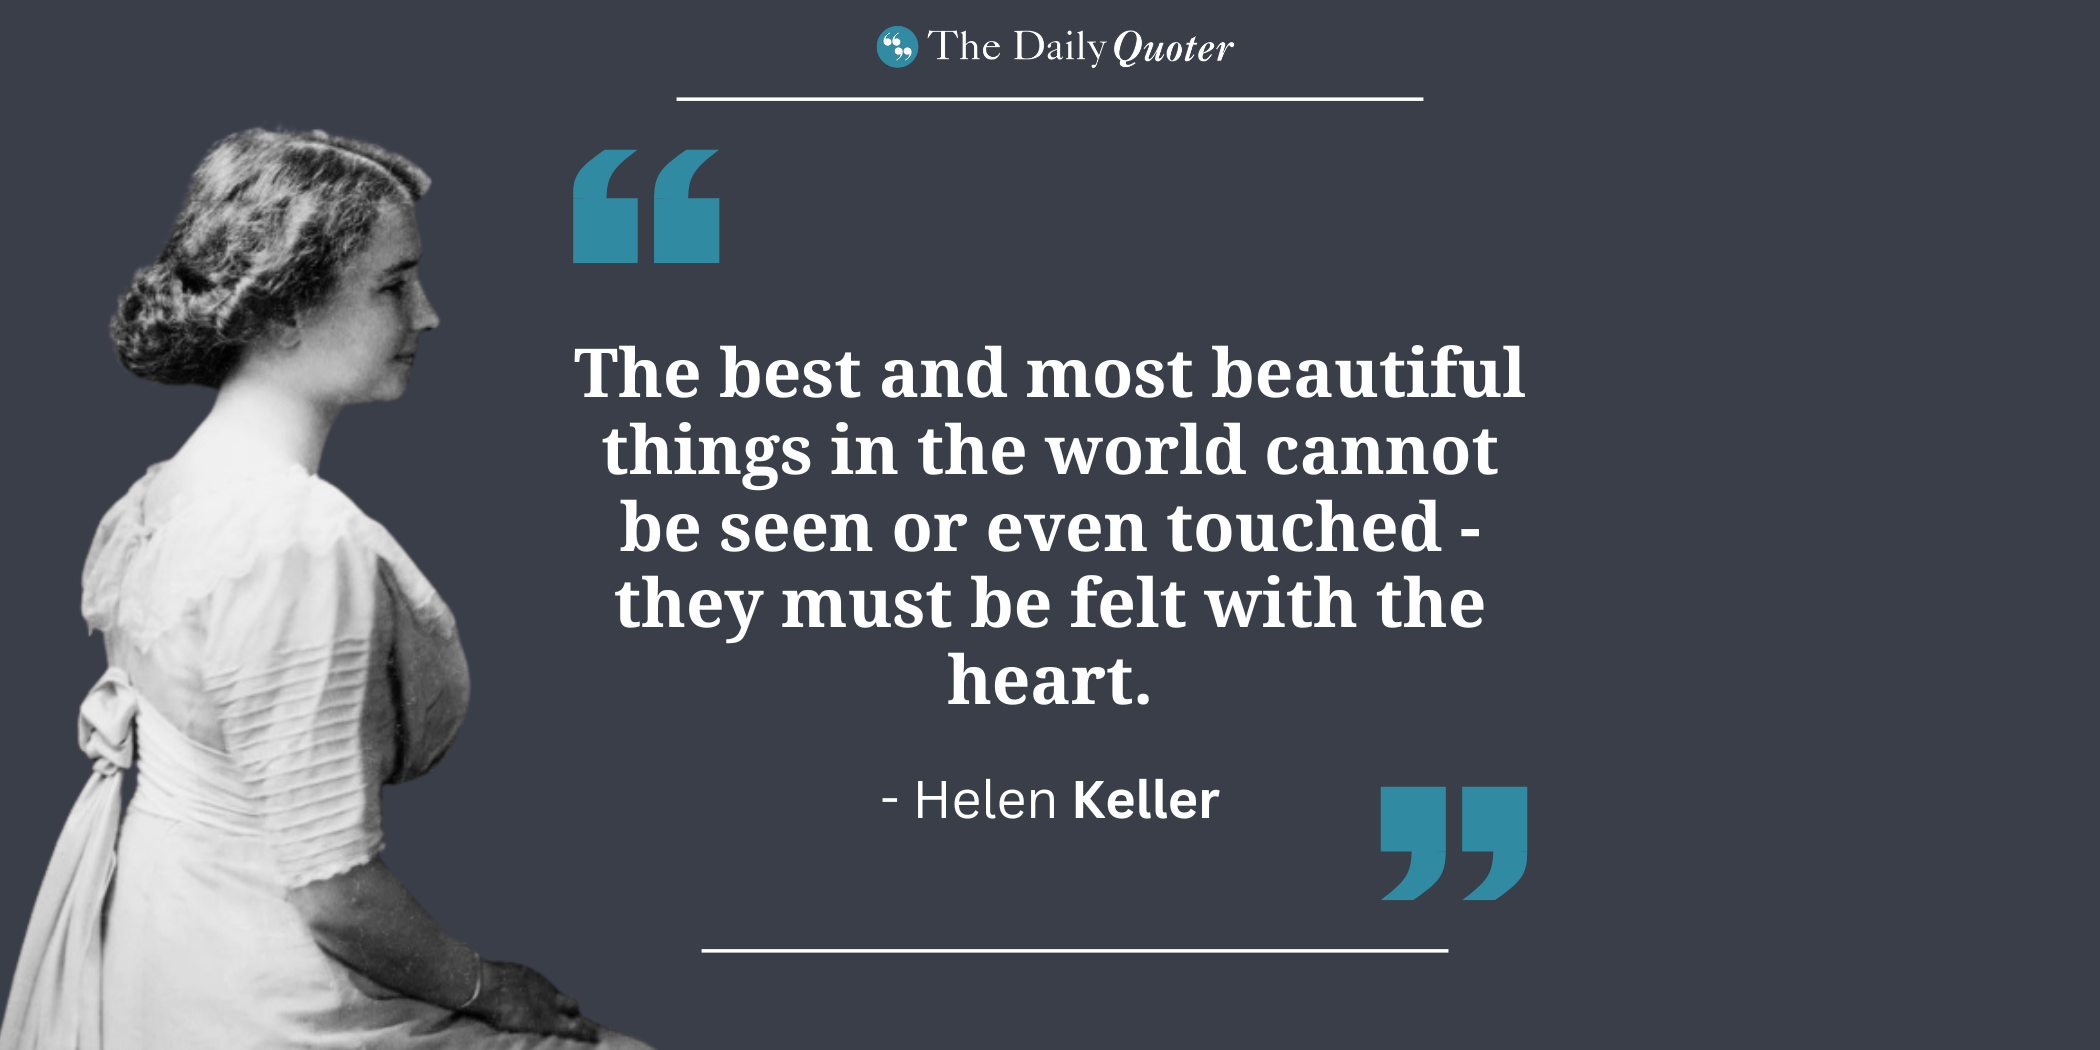 The best and most beautiful things in the world cannot be seen or even touched – they must be felt with the heart. Helen Keller